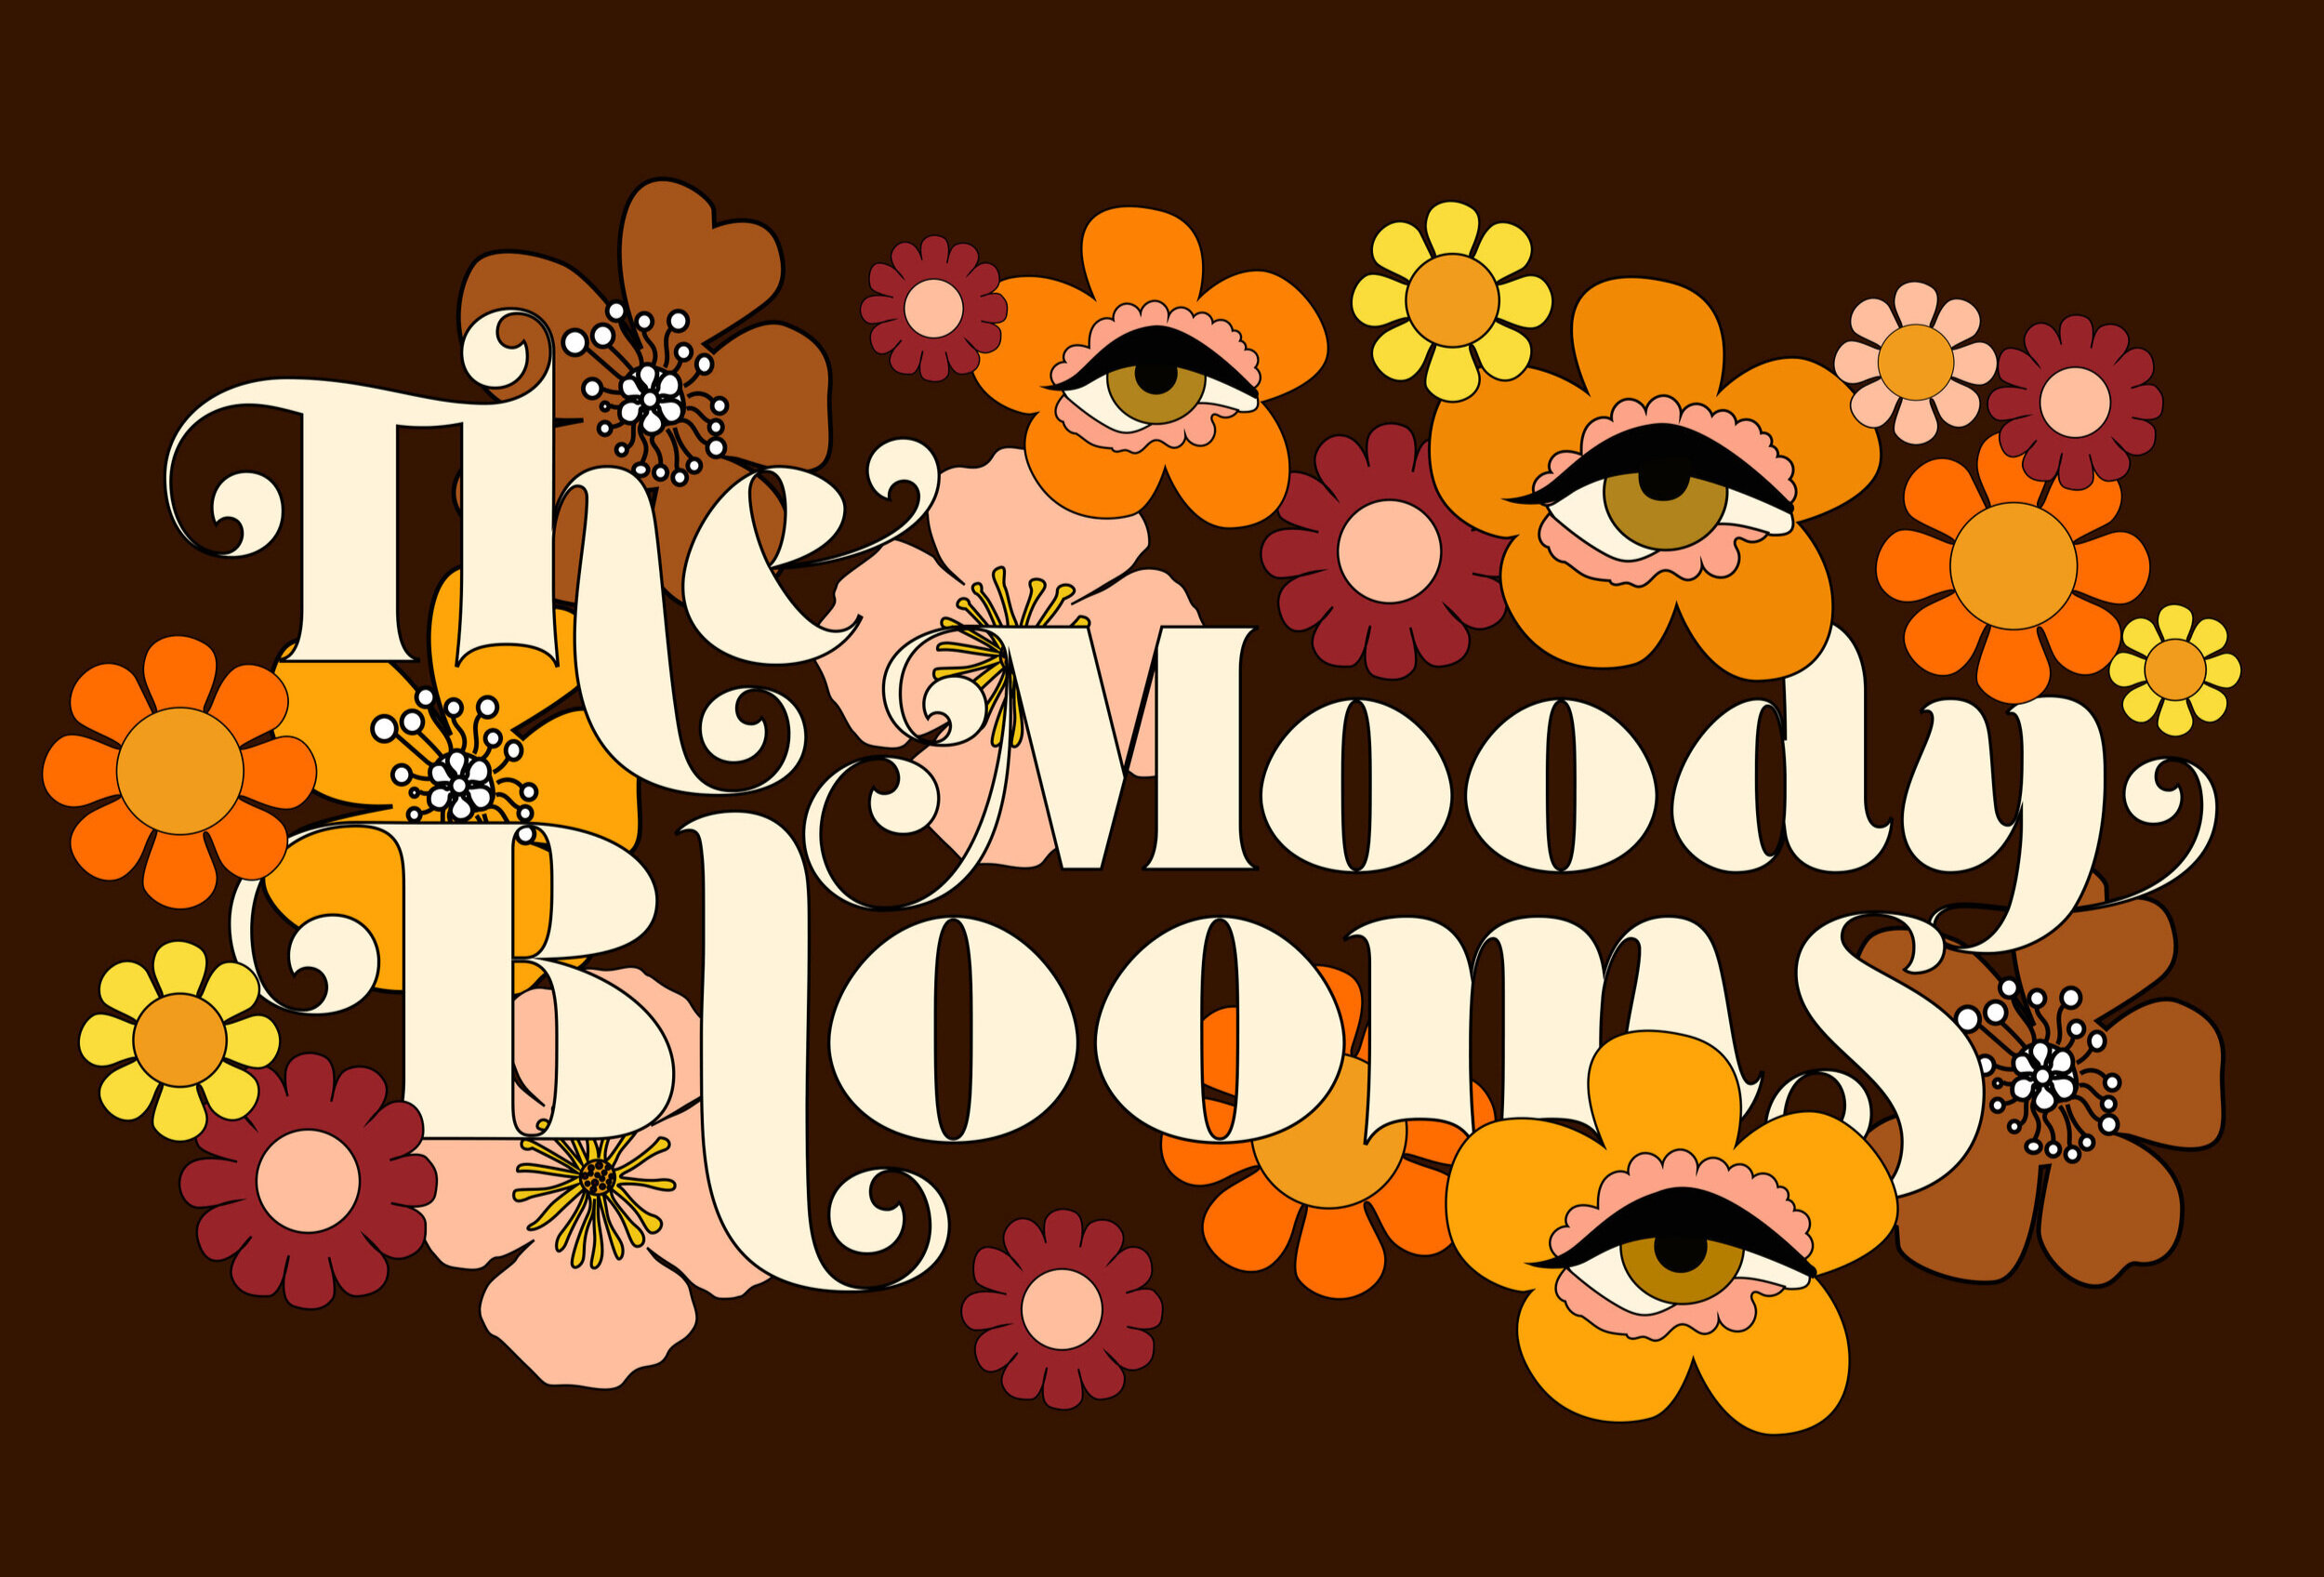 The Moody Blooms